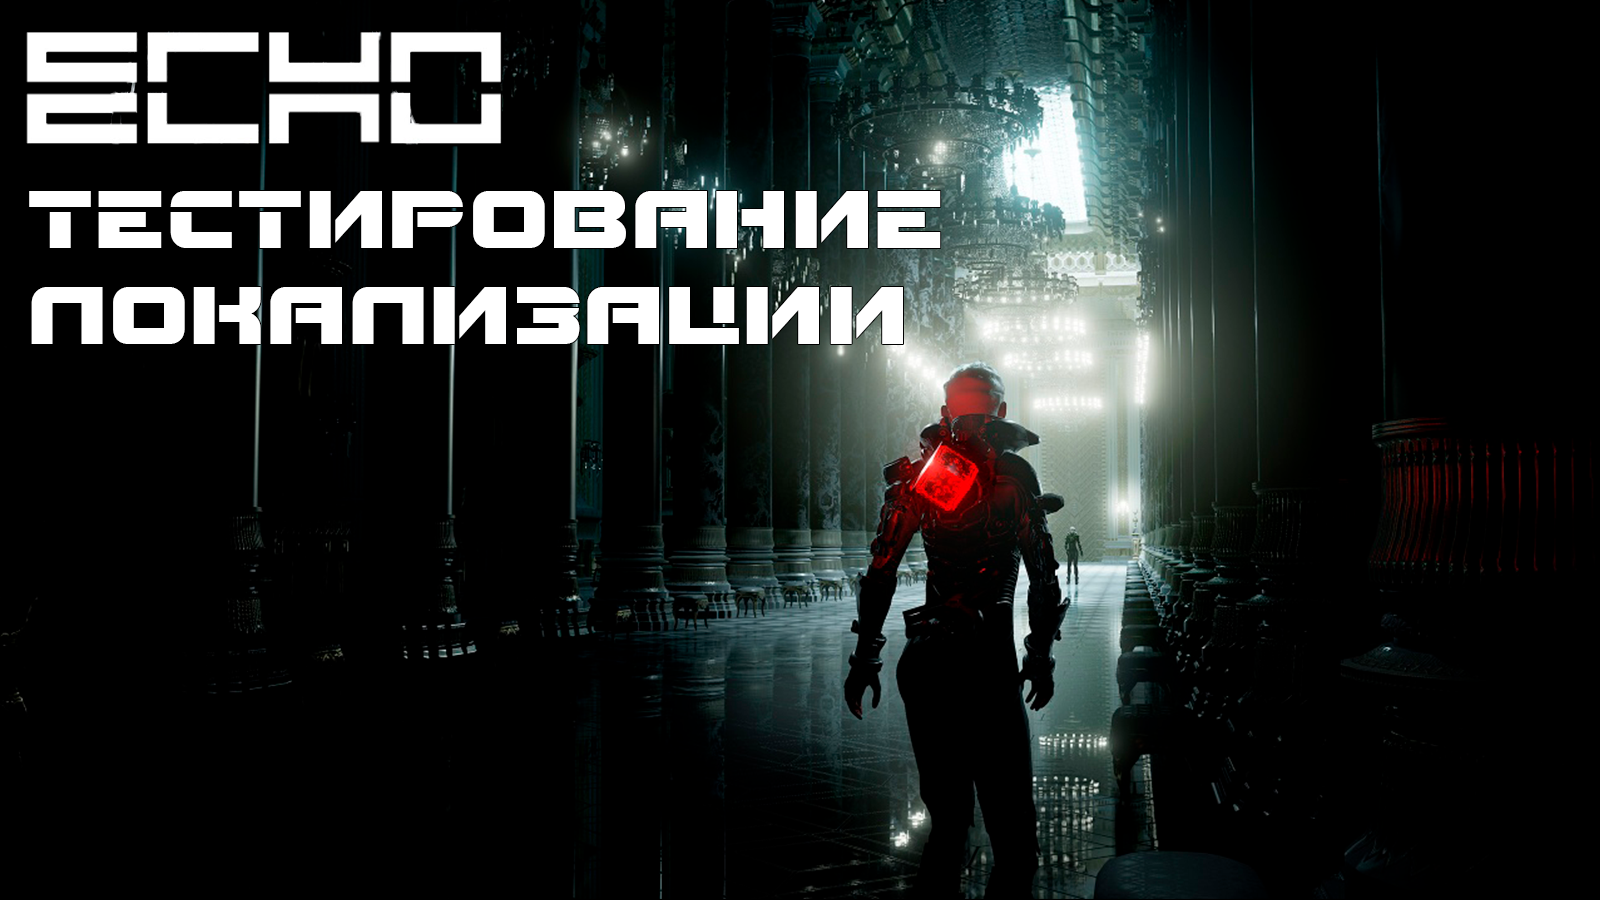 Demonstration and testing of the localization of the game Echo - My, Echo, Dubbing, Russifier, , Rg Mechanics, Mechanicsvoiceover, Russian version, Video